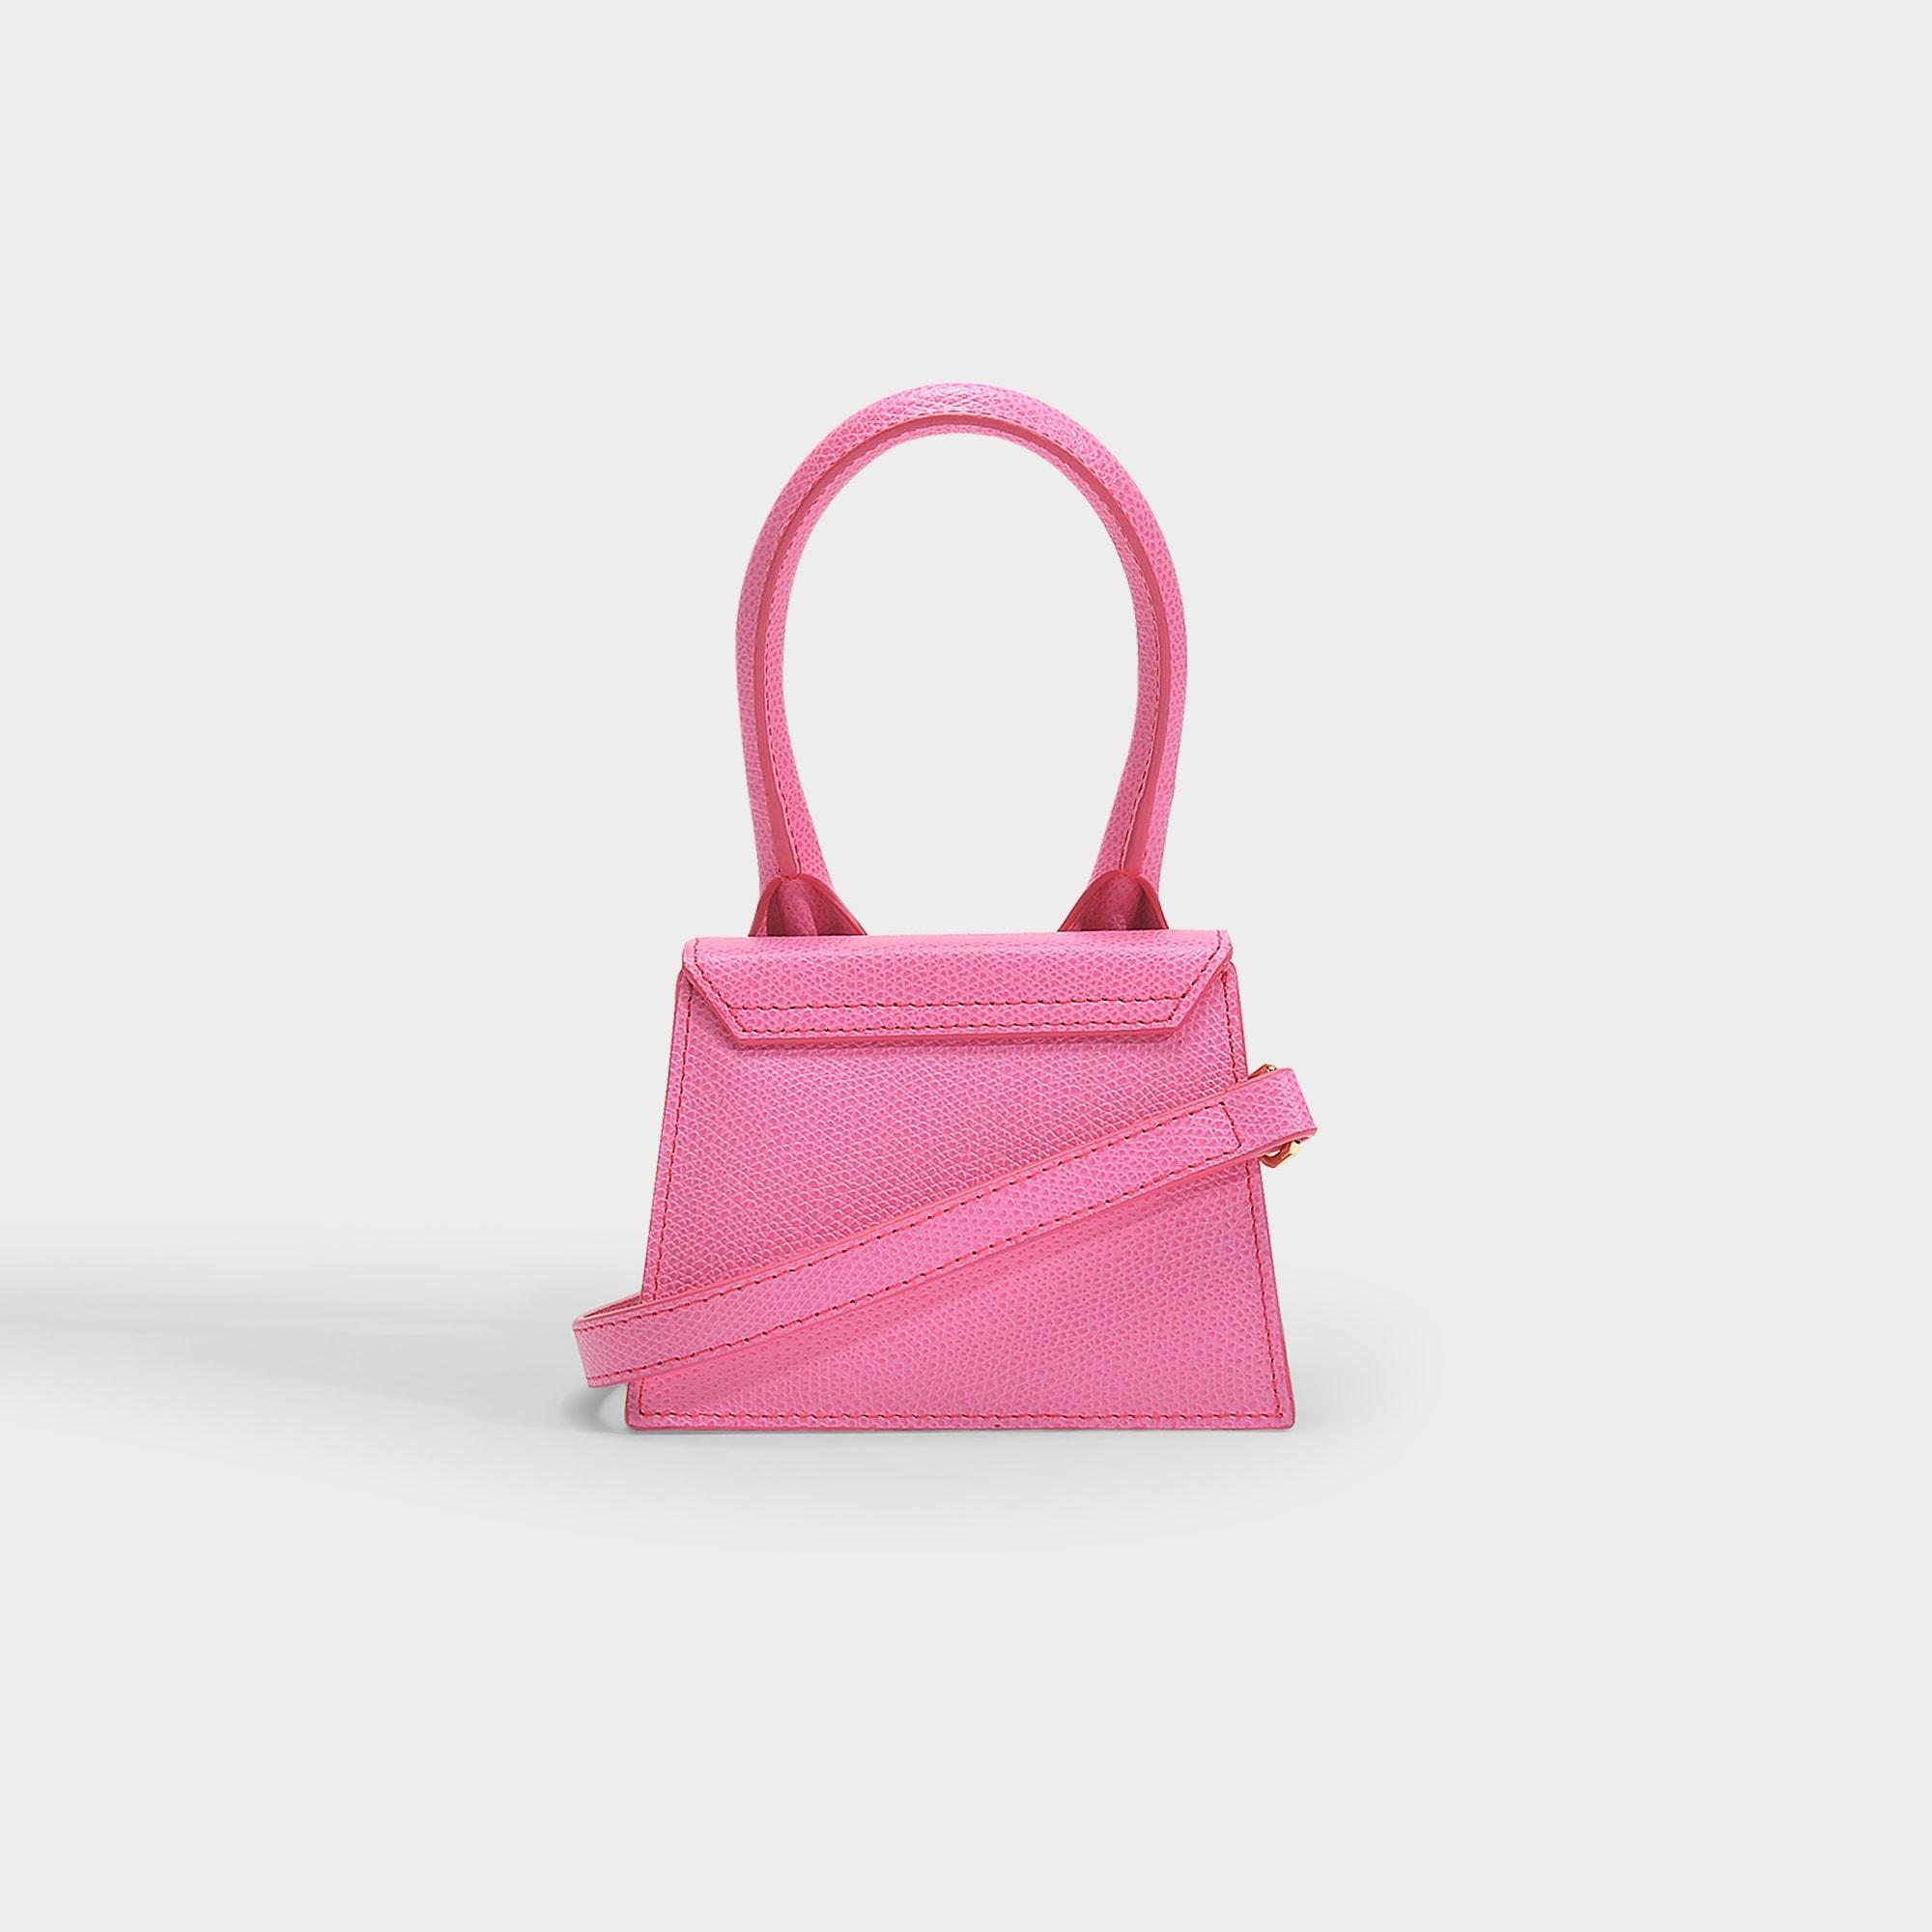 Jacquemus Leather Le Chiquito Bag In Pink Calfskin - Lyst